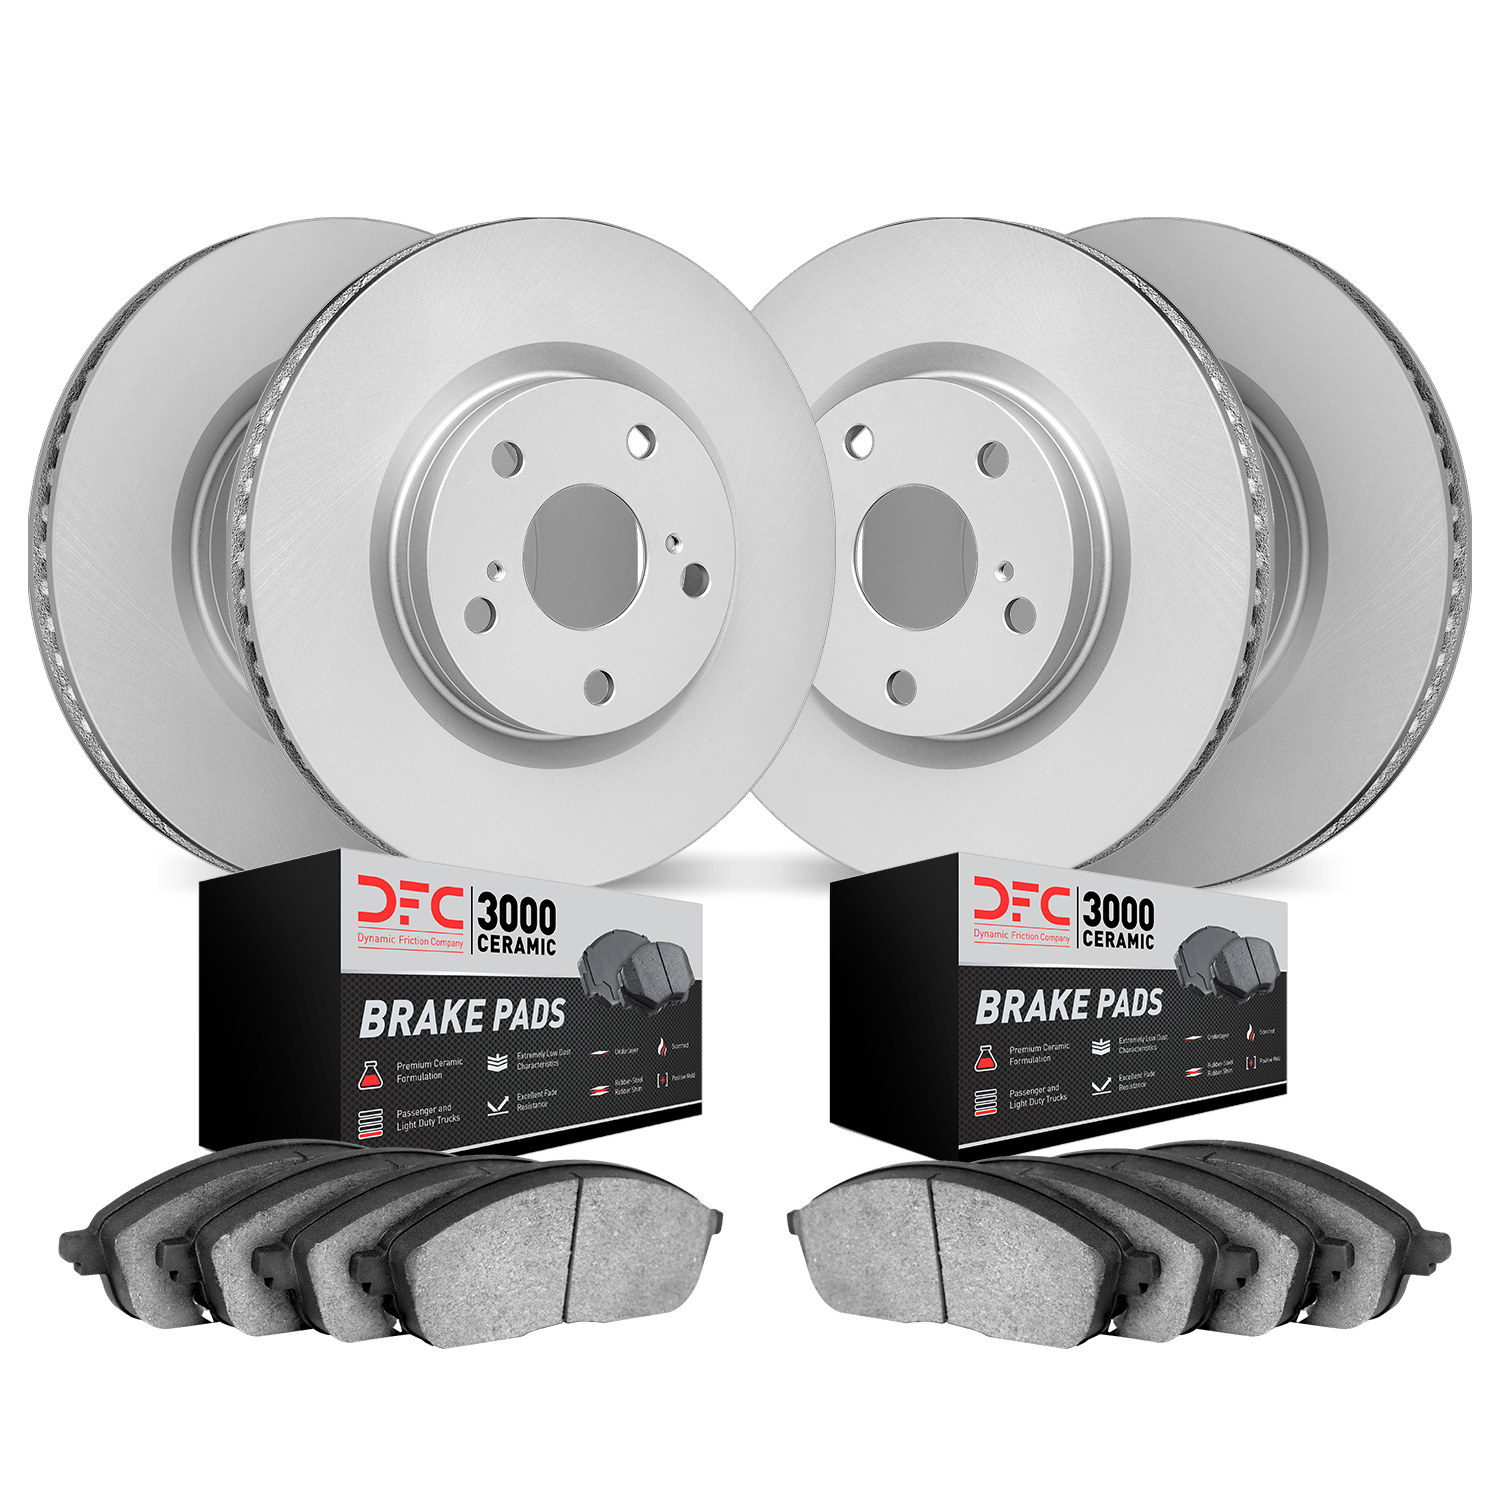 4304-73028 Geospec Brake Rotors with 3000-Series Ceramic Brake Pads Kit, 2008-2011 Audi/Volkswagen, Position: Front and Rear